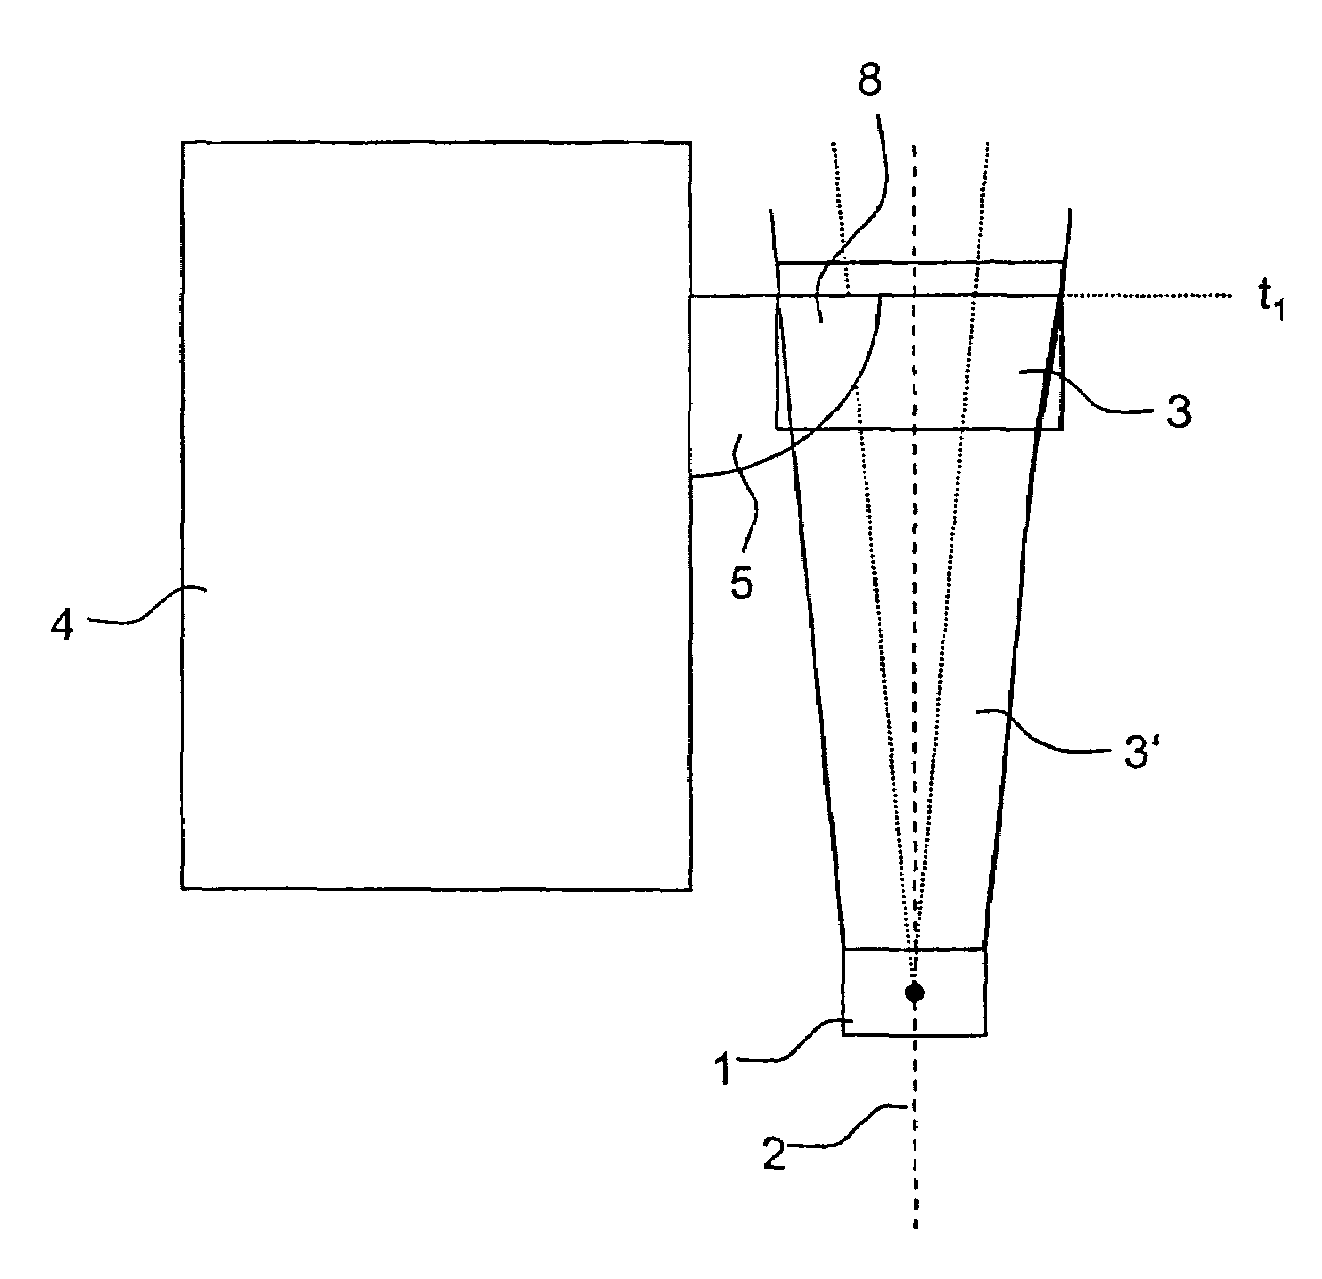 Process and device for avoiding collision while opening vehicle doors